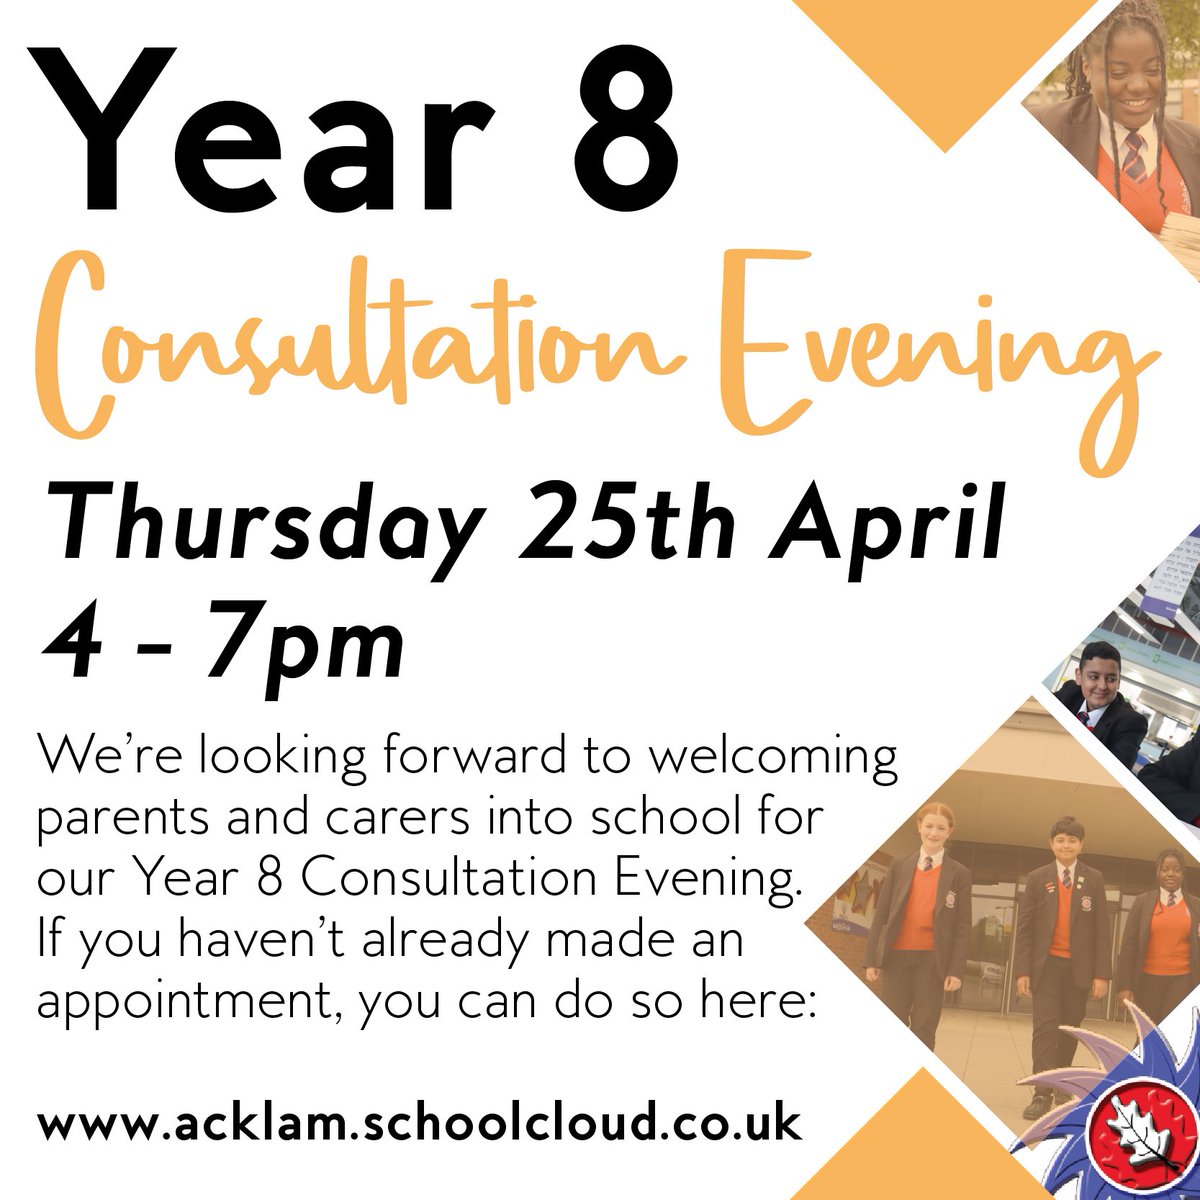 ✨ Year 8 Consultation Evening 📅 Thursday 25th April ⏰ 4-7pm If you haven't yet booked your appointment for Year 8 Consultation Evening, you can do so by clicking the link below. ➡️ acklam.schoolcloud.co.uk